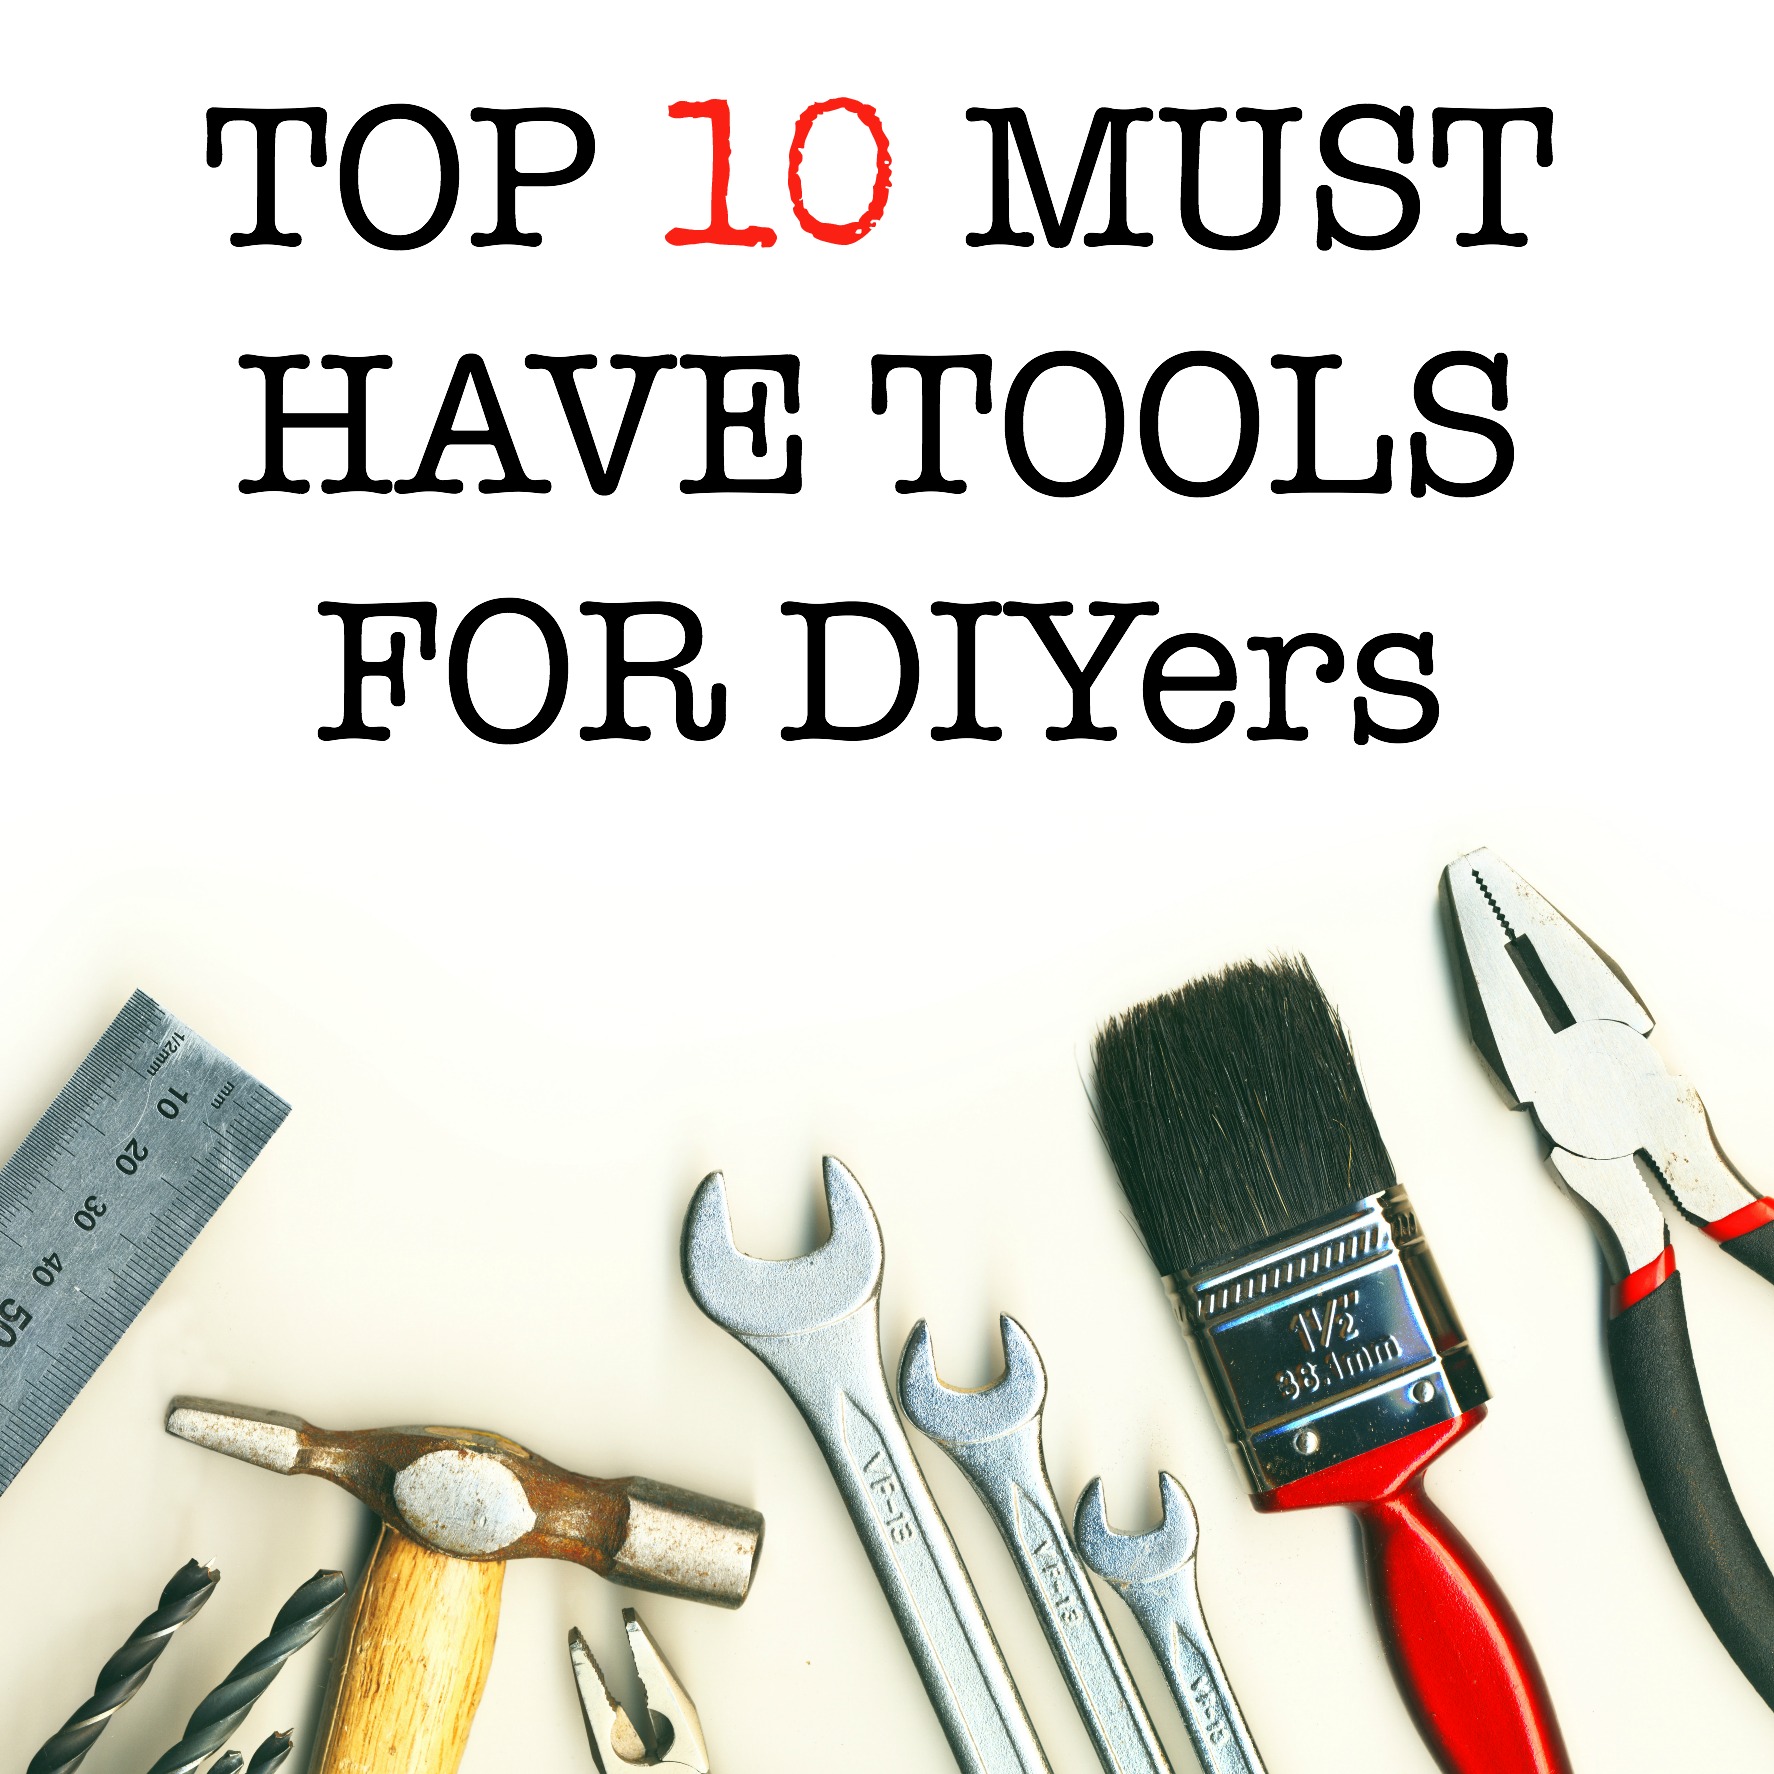 Top 10 must have tools for DIYers